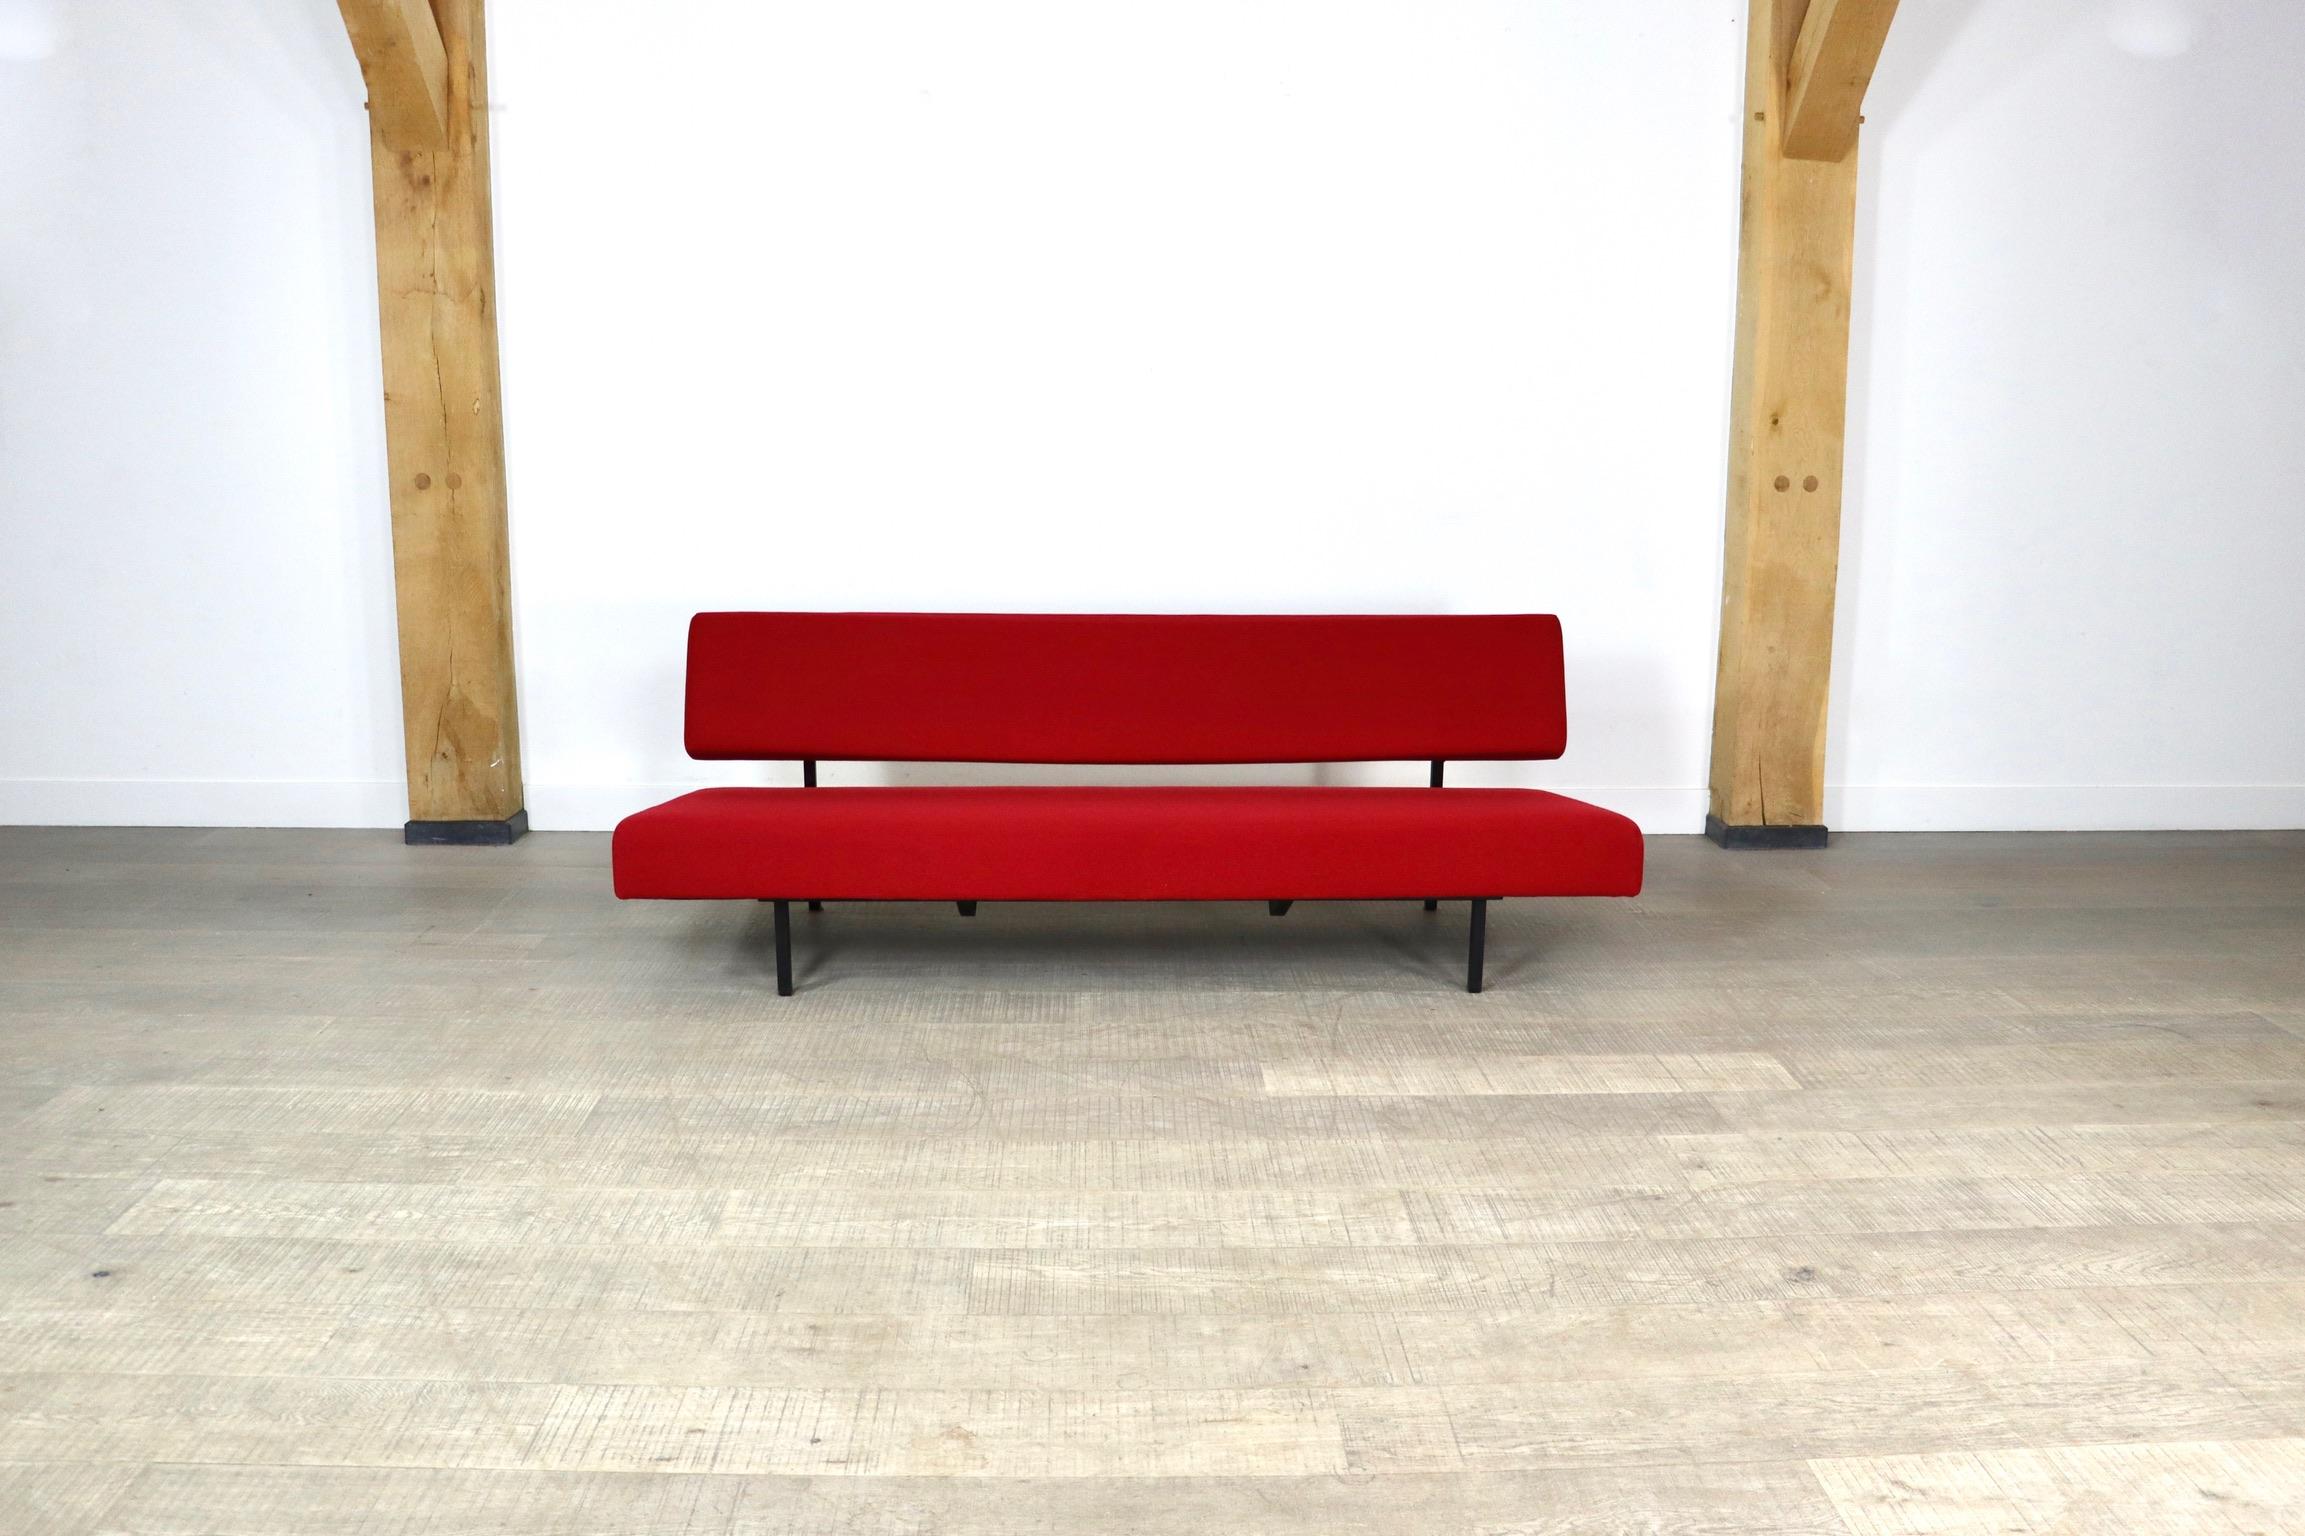 Early Edition of the iconic BR03 Sofa bed by Martin Visser for ‘T Spectrum, The Netherlands, 1956. The clever design allows you to easily convert this nice sofa into a comfortable bed within seconds. Simply flip over the backrest and the nicely